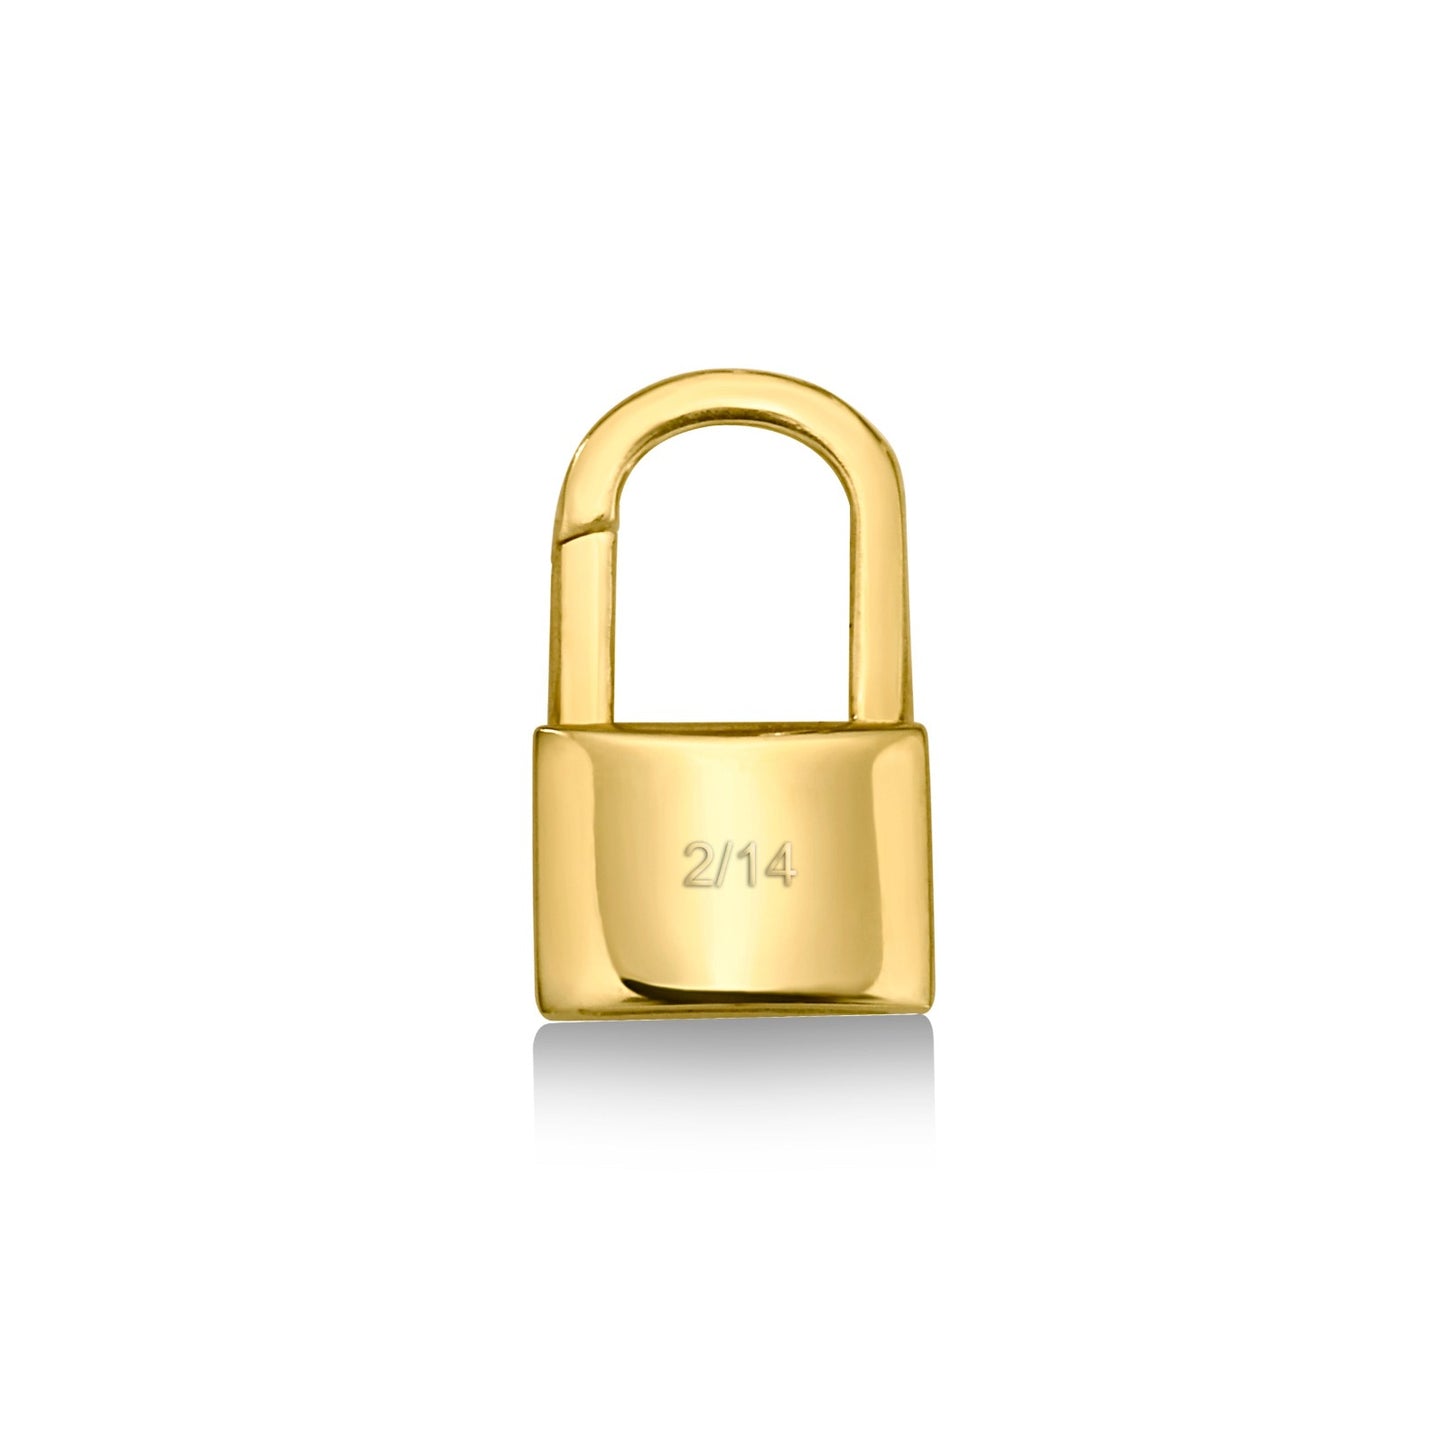 14k yellow gold padlock charm with 2/14 engraved.